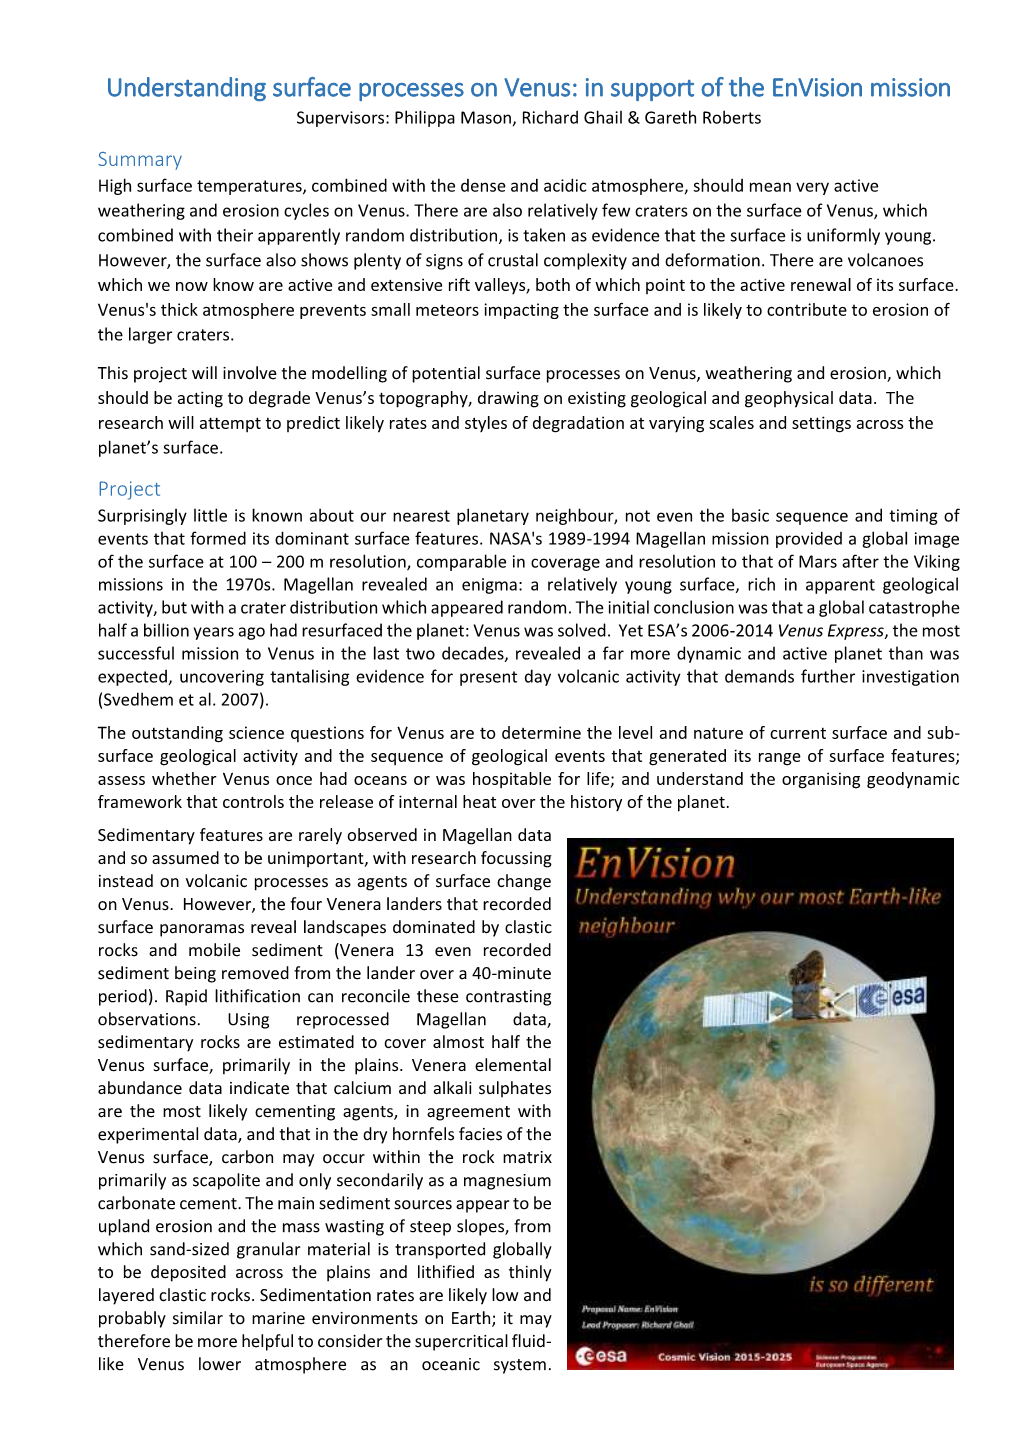 Understanding Surface Processes on Venus: in Support of the Envision Mission